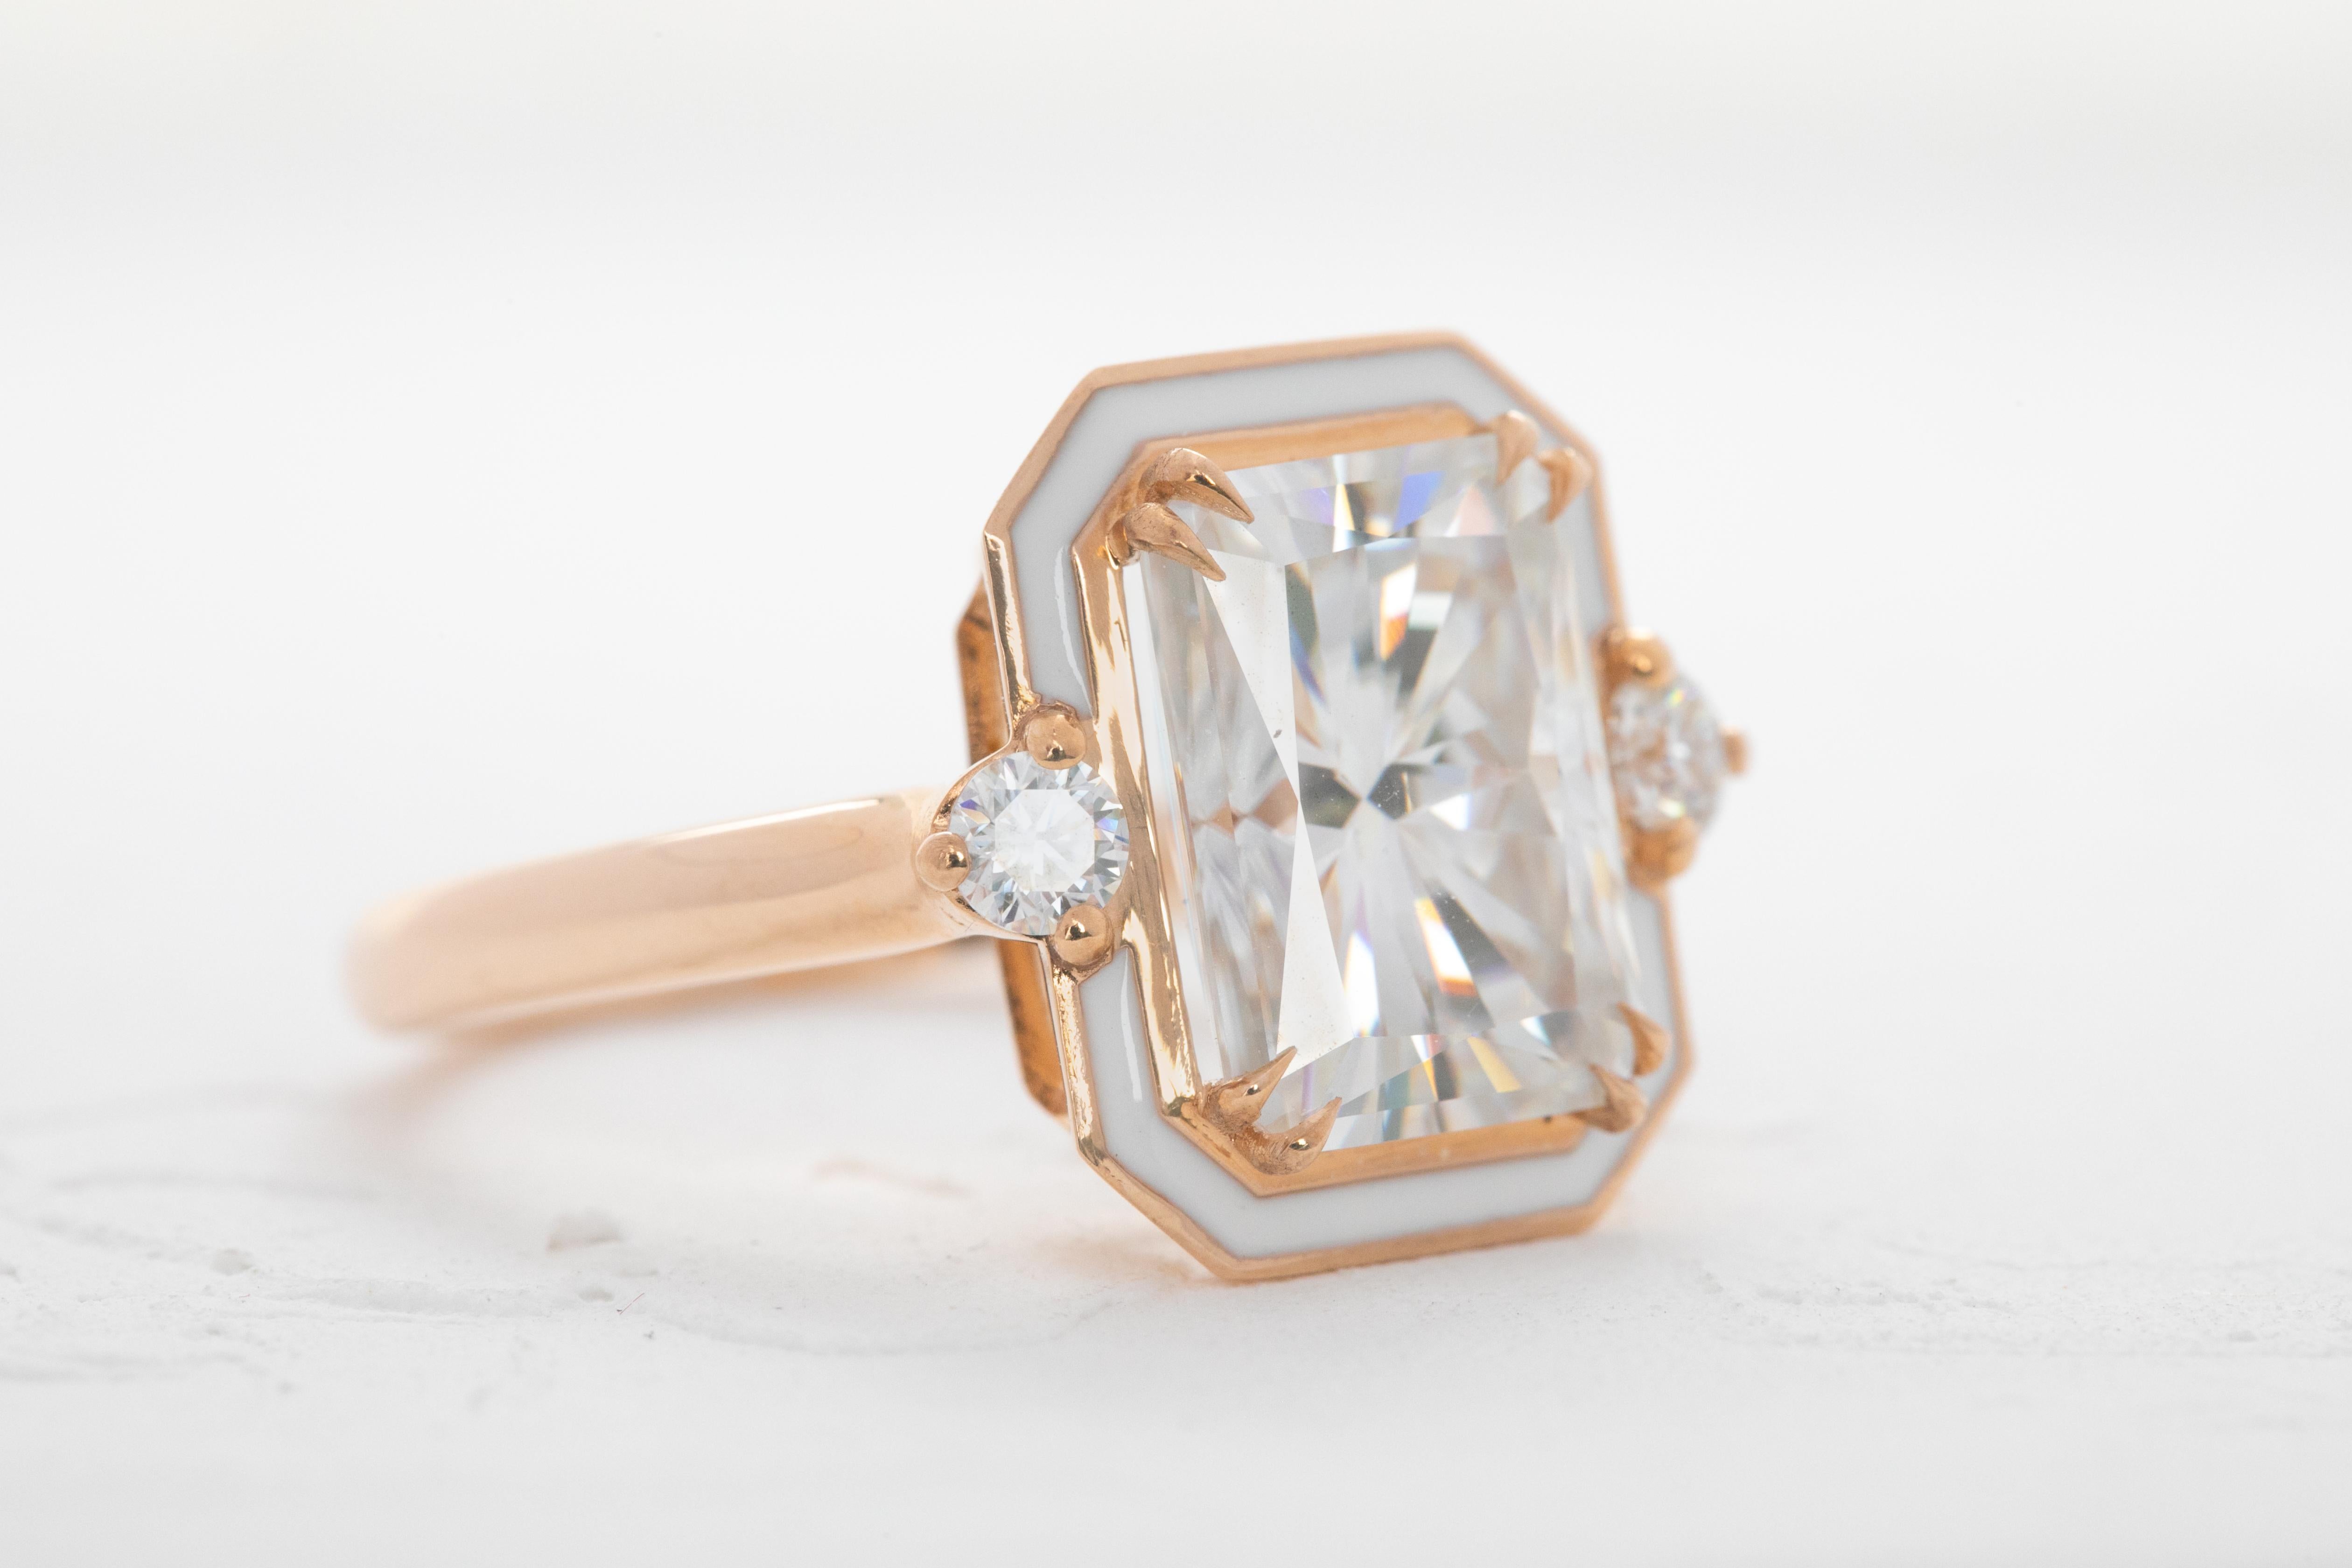 For Sale:  14k Solid Gold Art Deco Ring, 4.08ct Moissanite Stone Ring and Enamel Ring 9